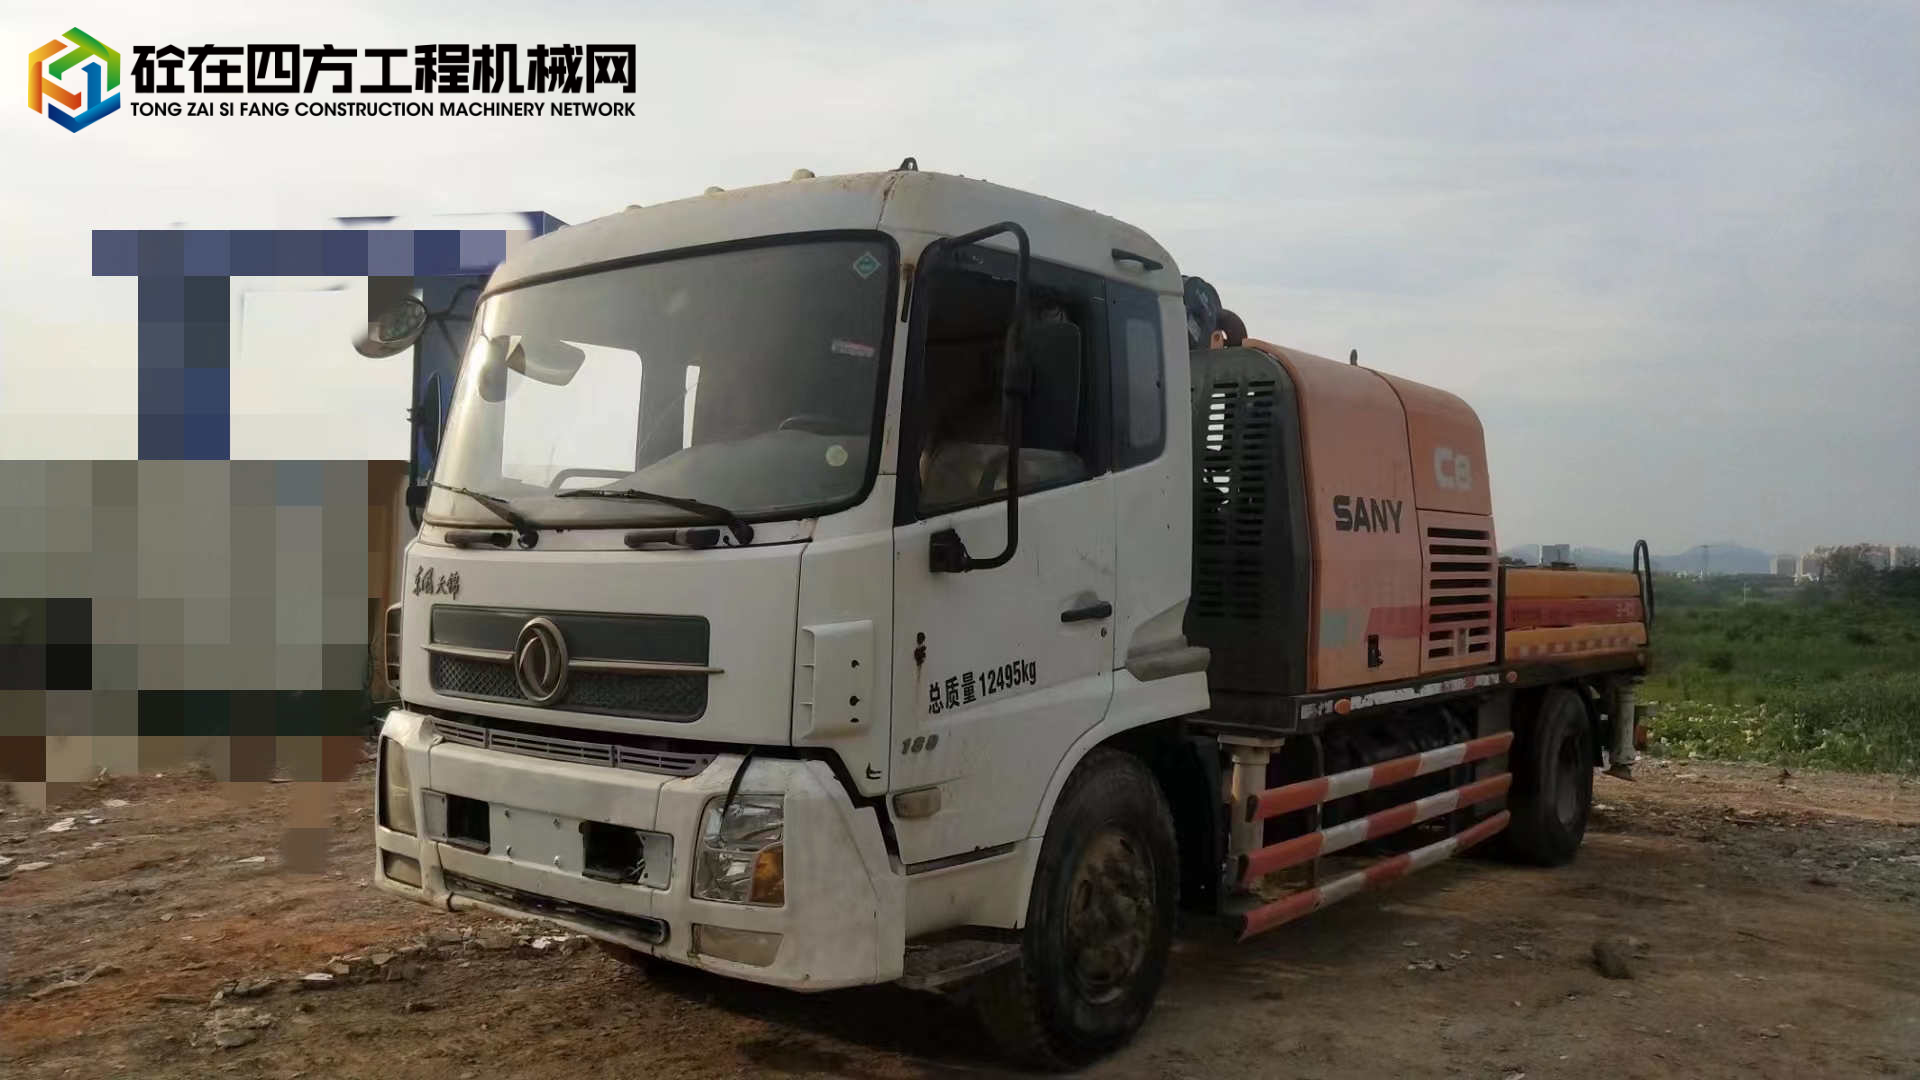 https://images.tongzsf.com/tong/truck_machine/20231106/16548a4976a33f.jpg